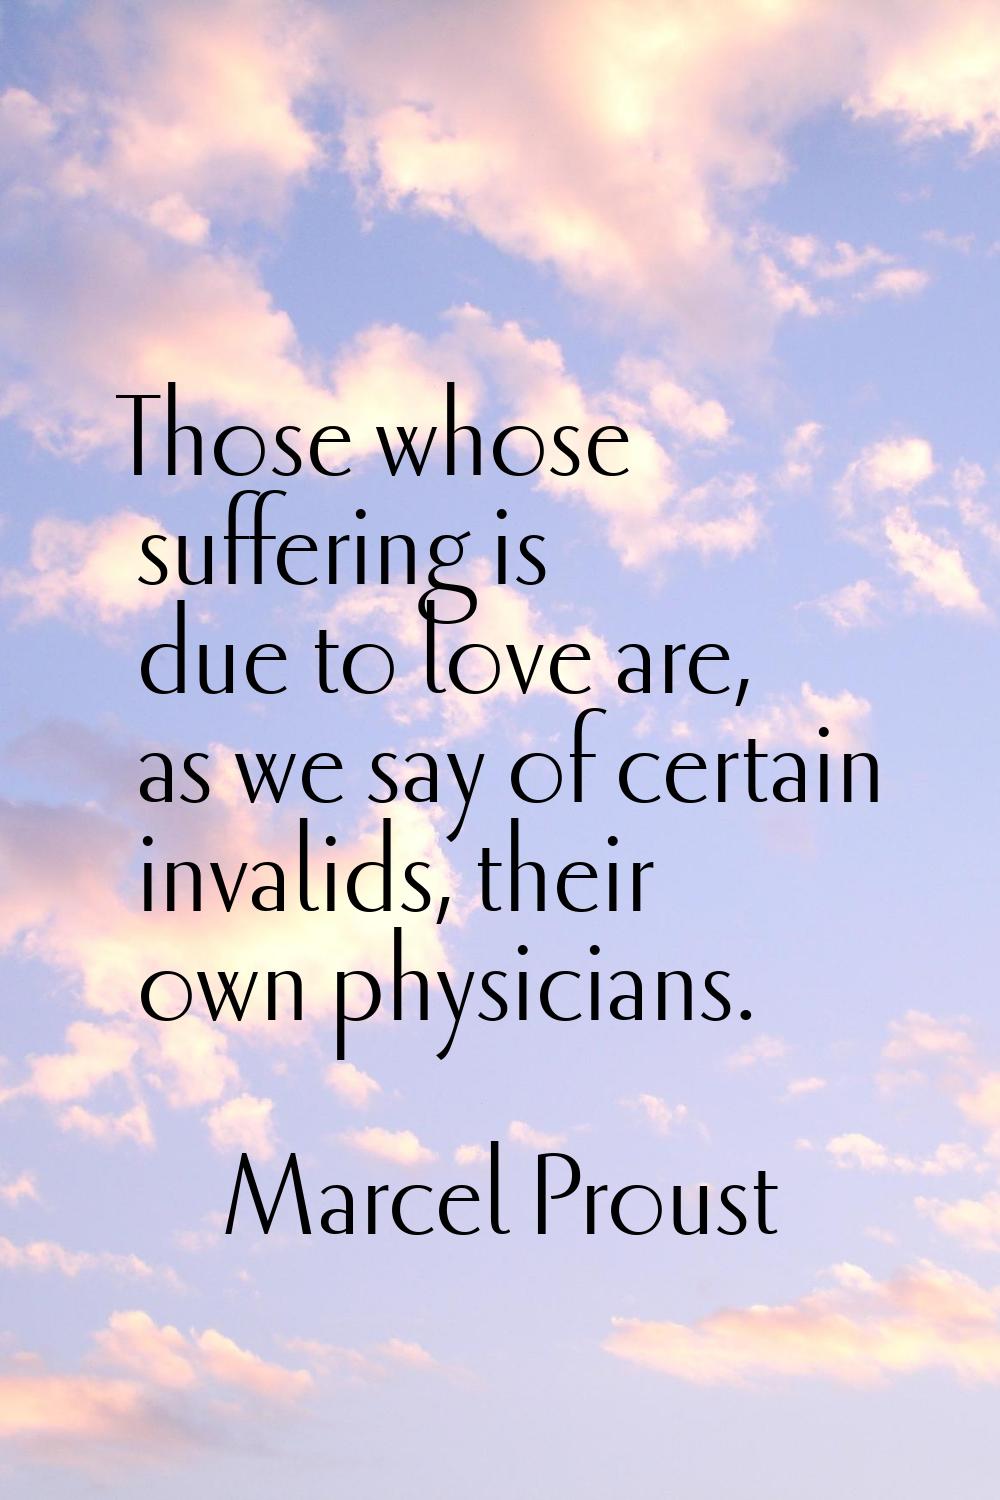 Those whose suffering is due to love are, as we say of certain invalids, their own physicians.